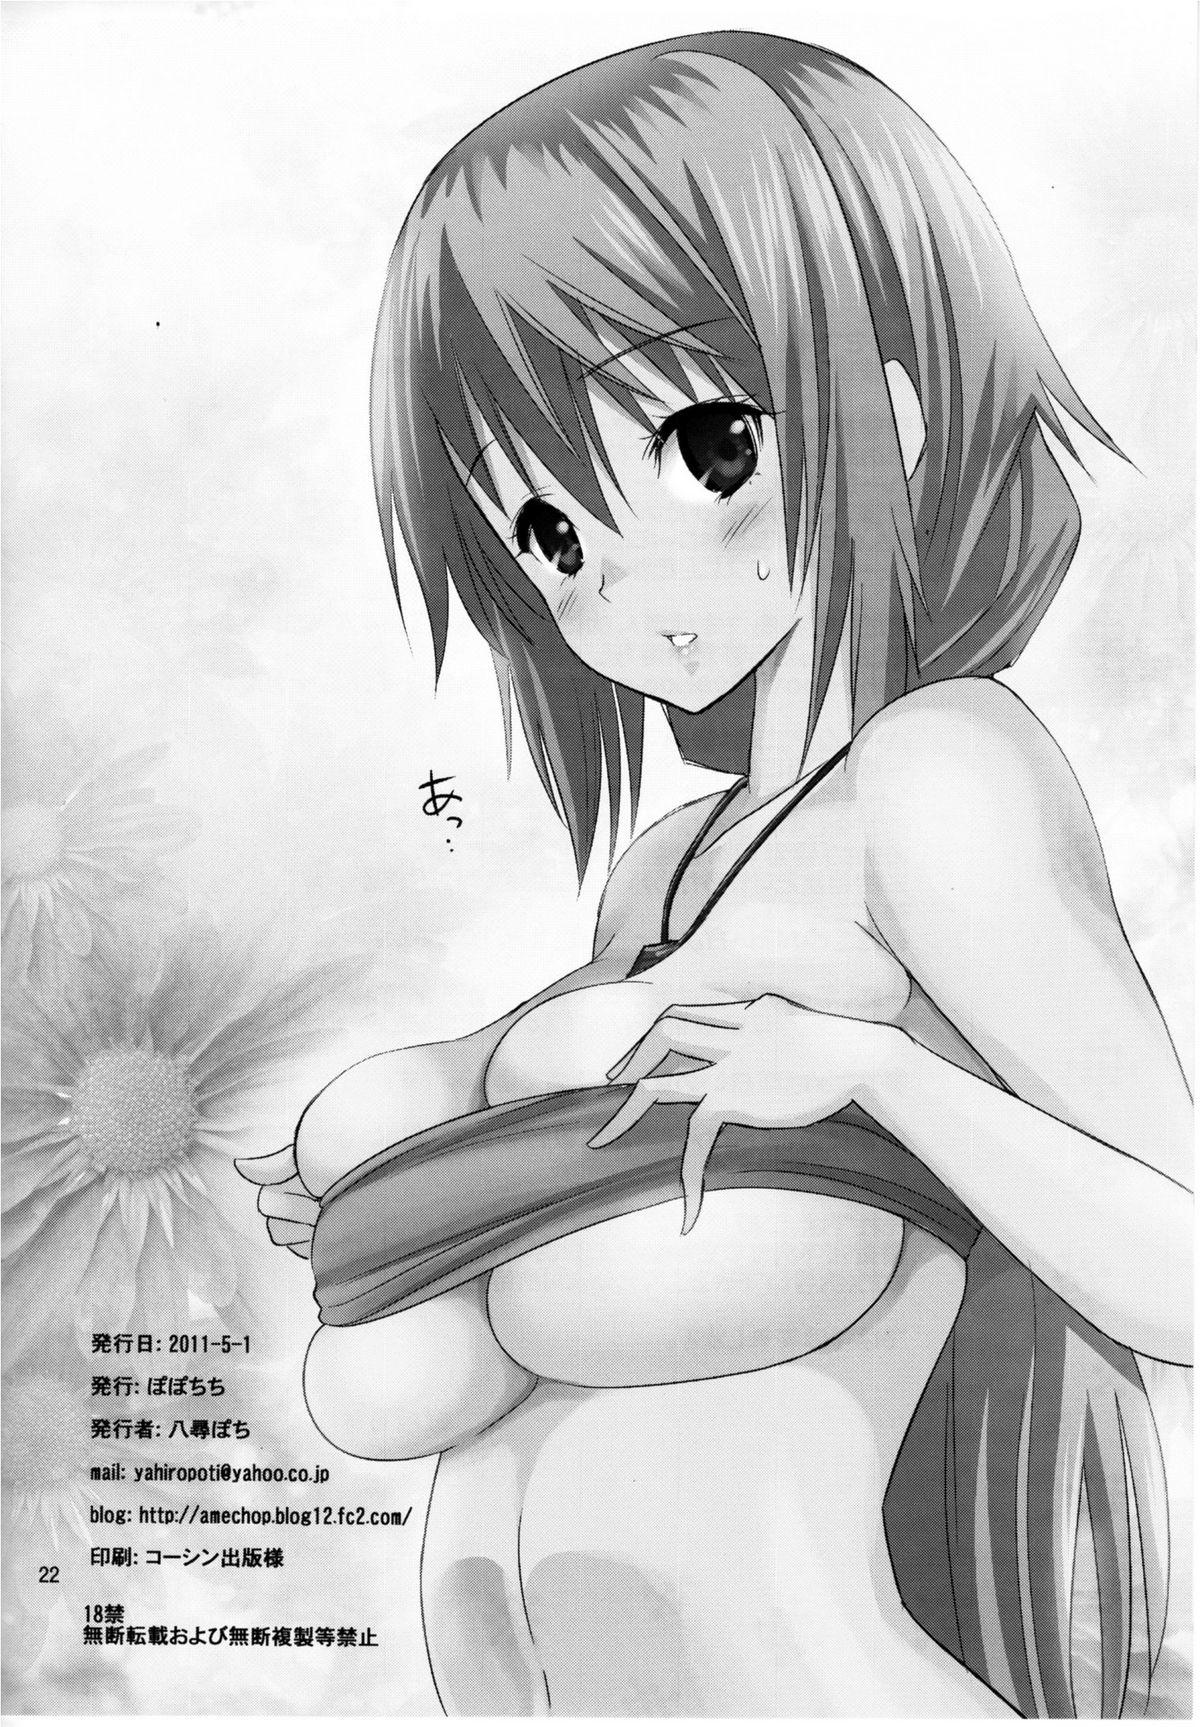 Tugging This is Harlem - Infinite stratos Rough Porn - Page 21